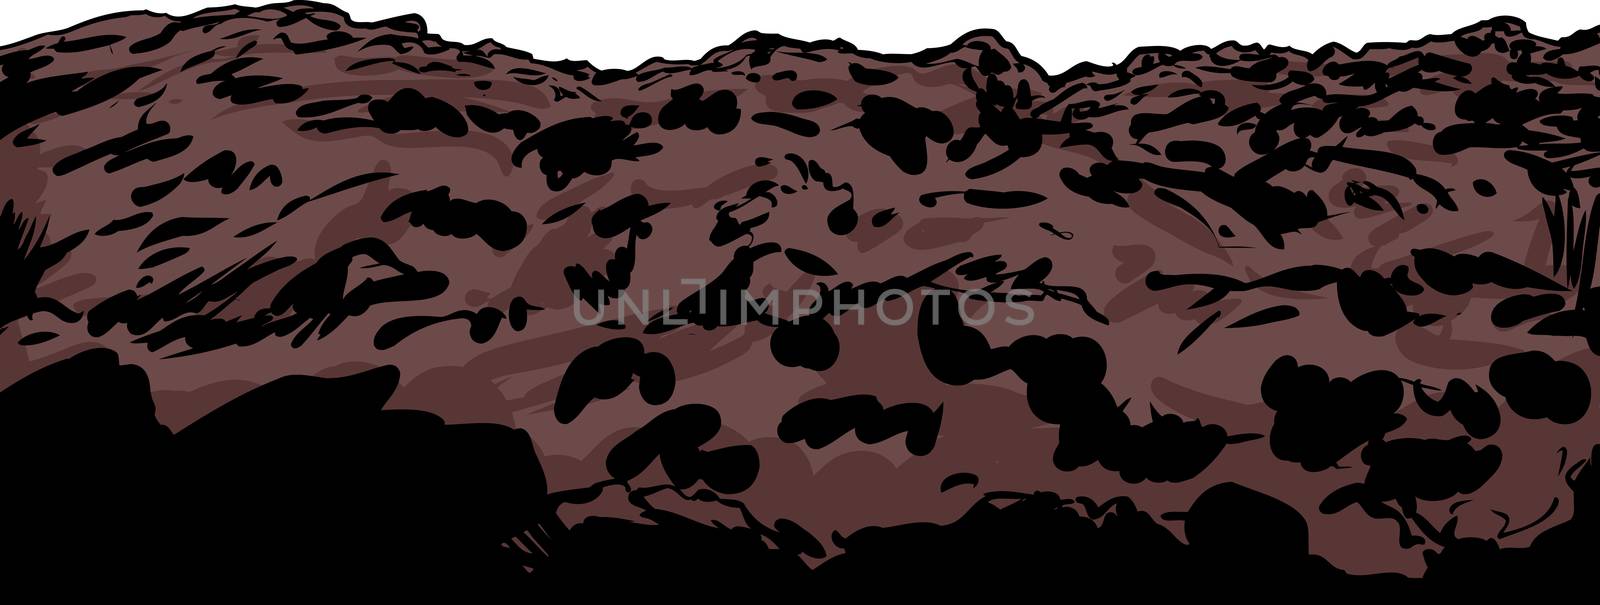 Close up illustration of clump of soil or rocky mining slag heap